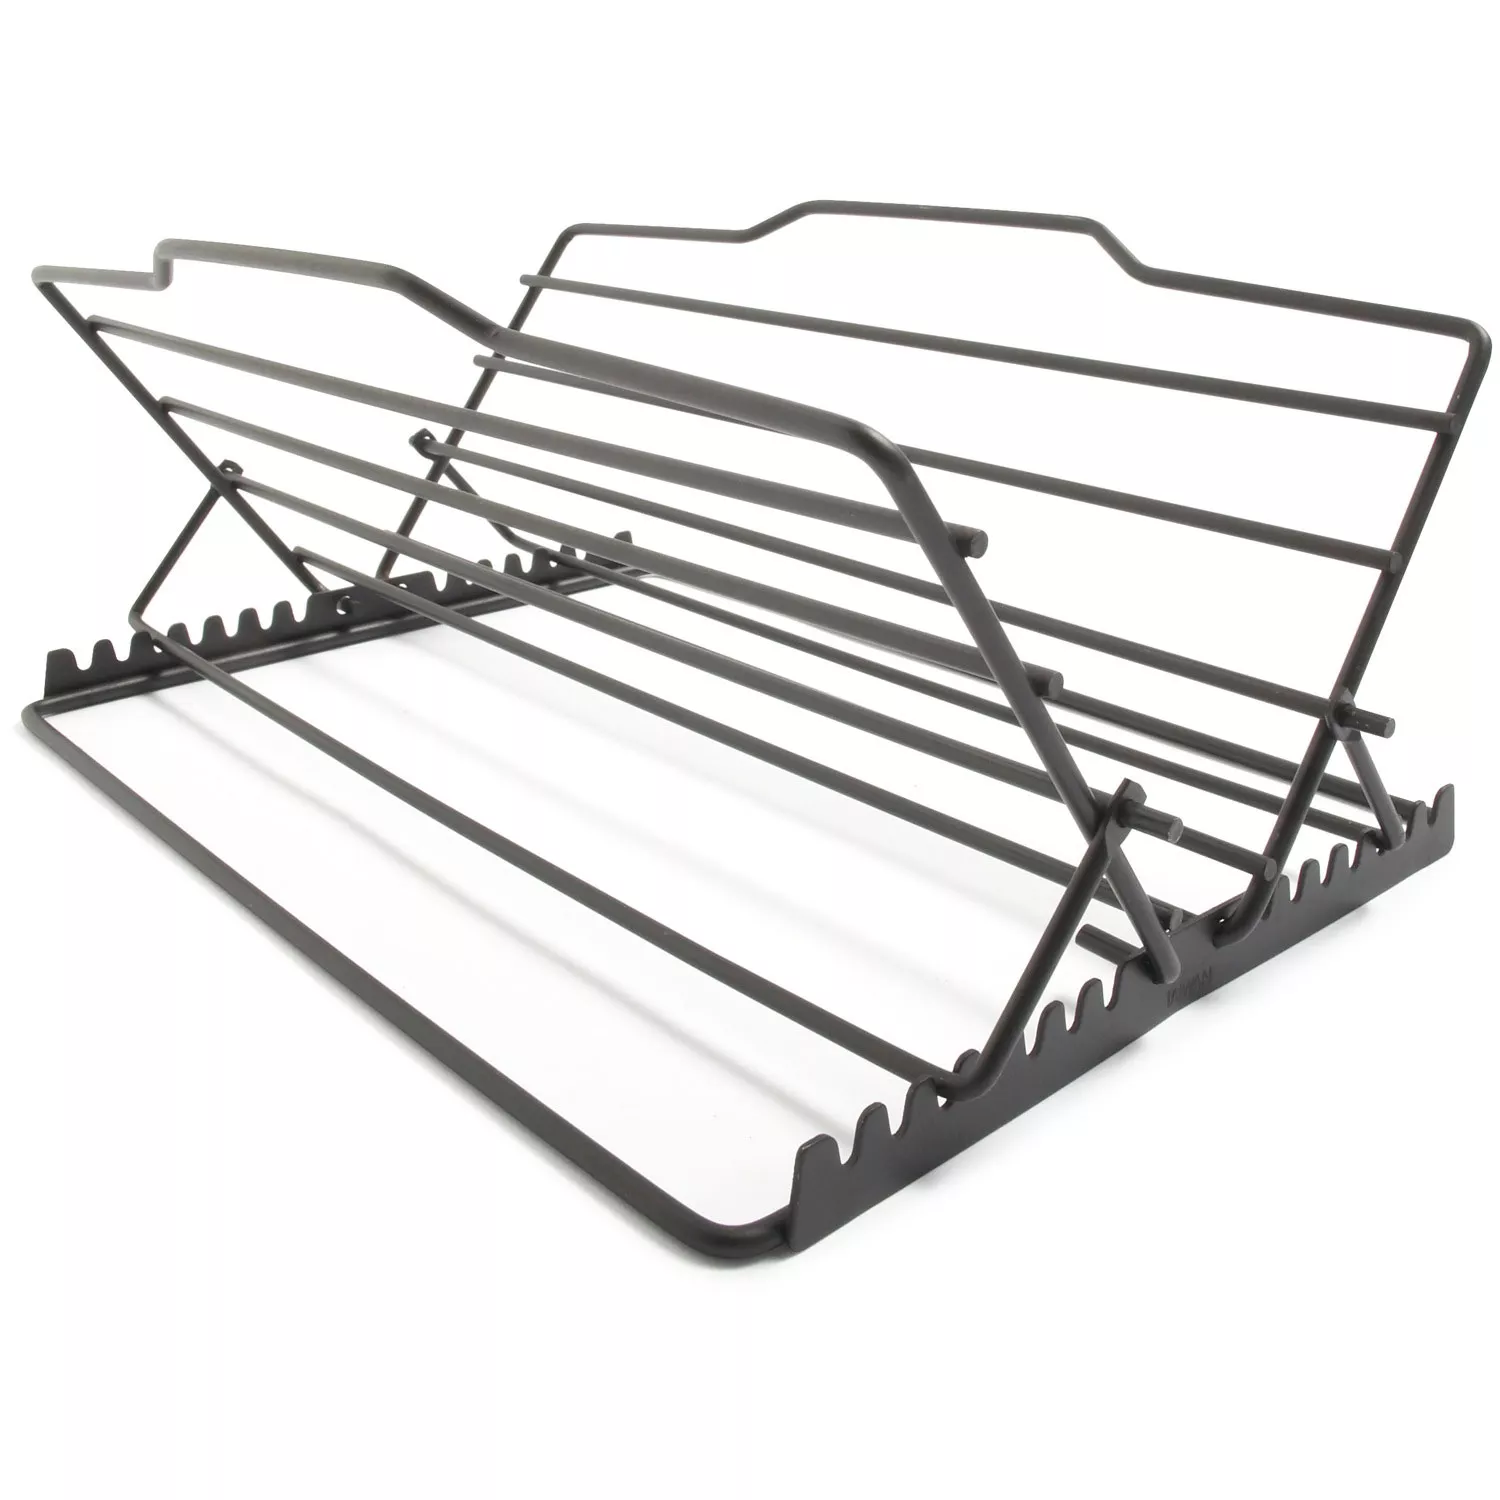 Sur La Table Over-the-Sink Drying Rack